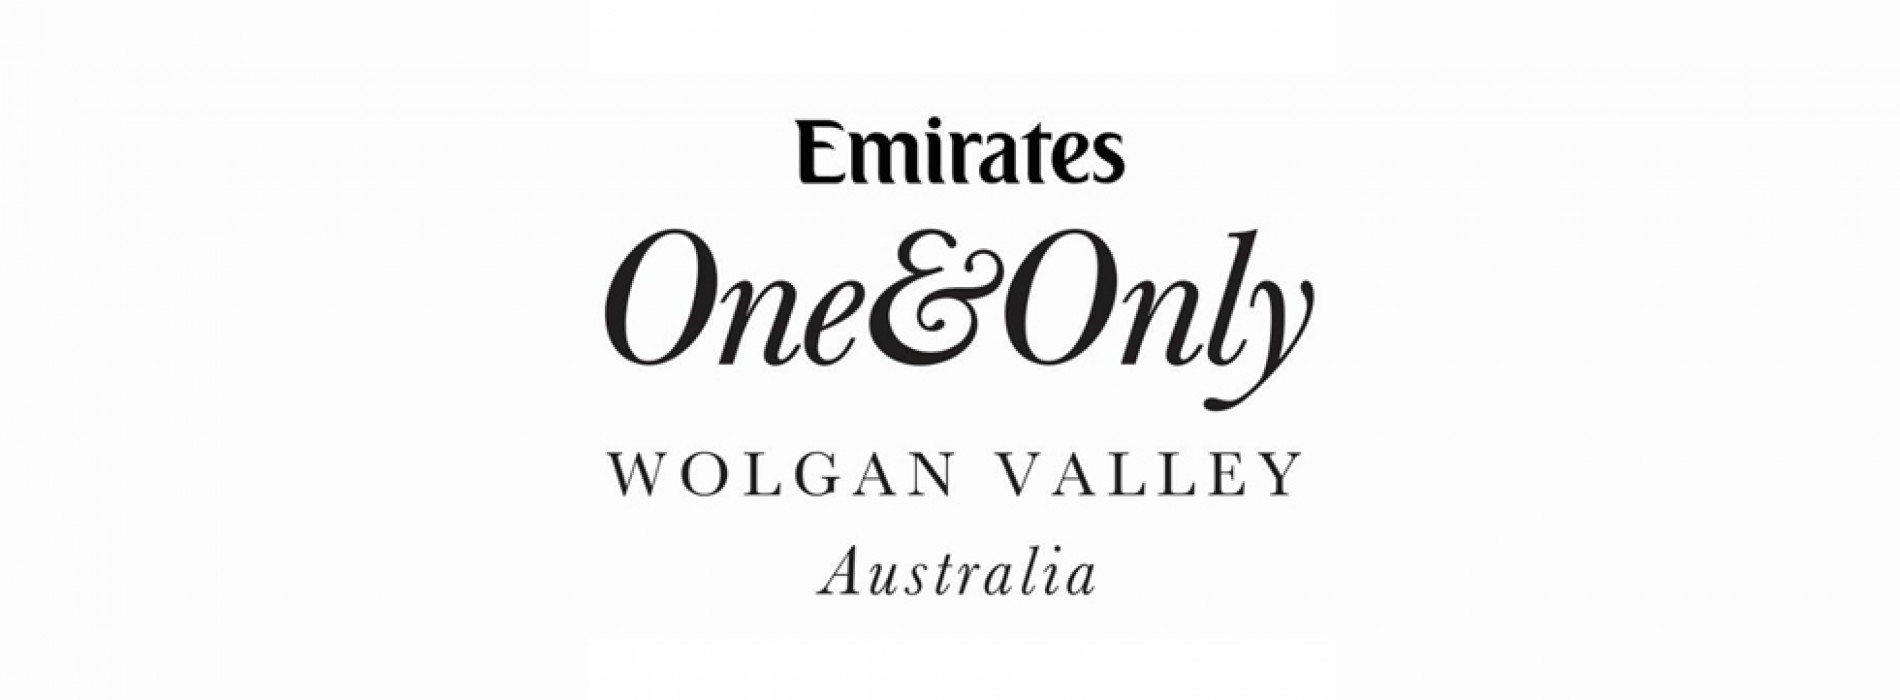 Celebrate Christmas in July with Emirates One&Only Wolgan Valley, Australia